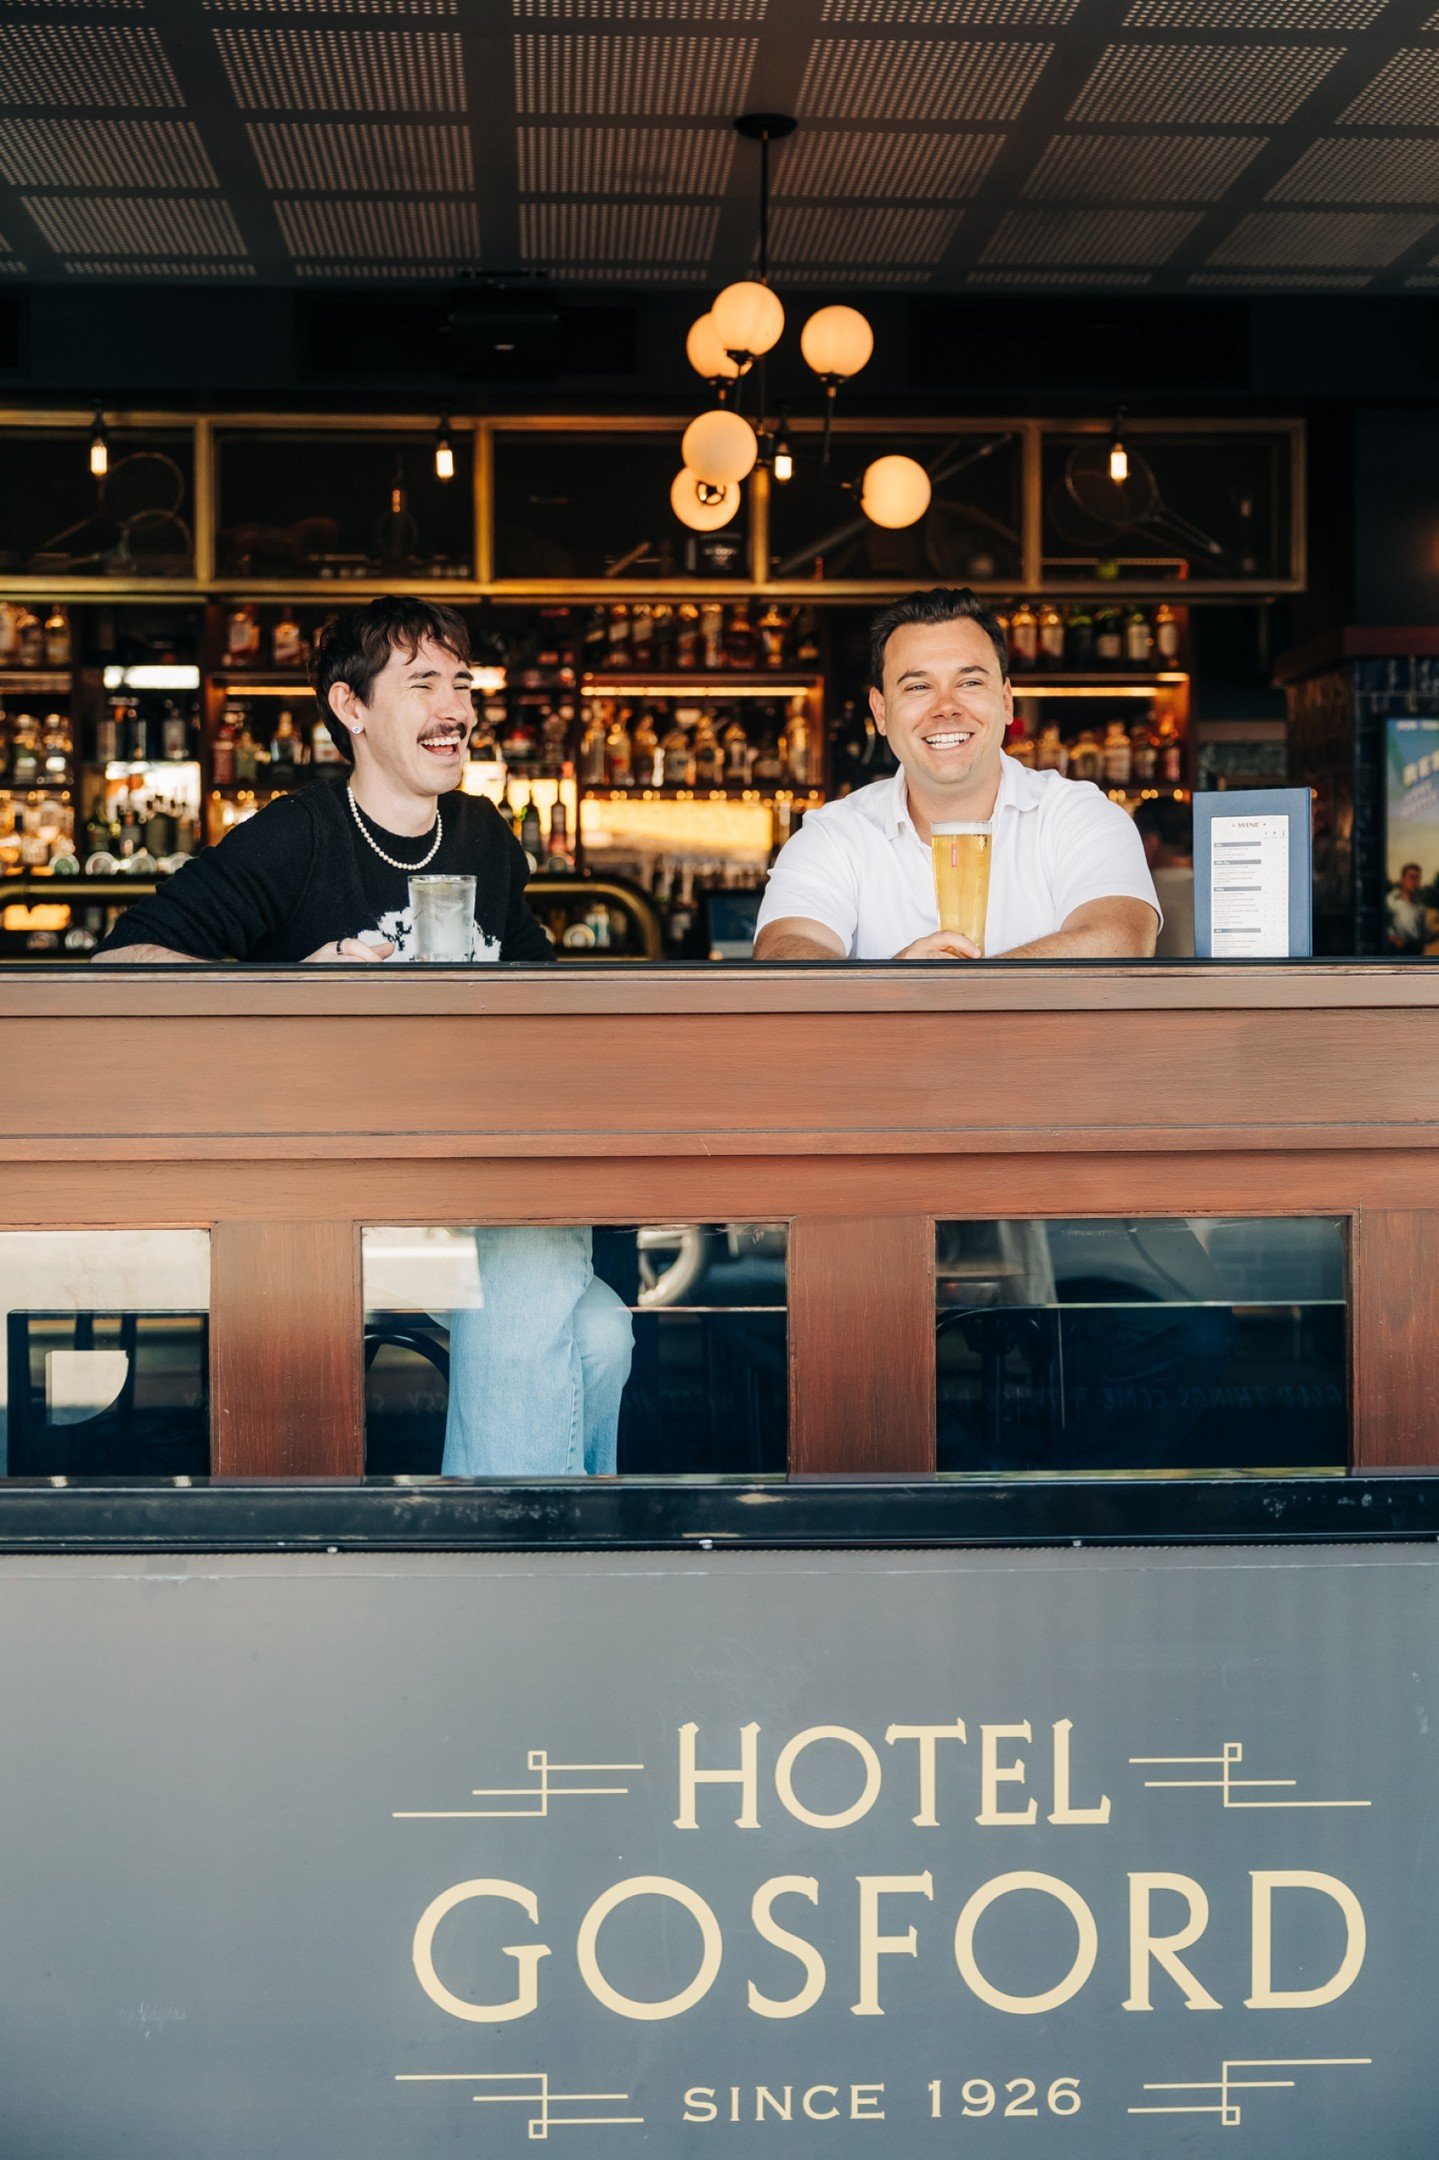 Our doors are open, and it's a cosy Autumn day - Top it off with a $10 pint of our Stone and Wood Green Coast Crisp!

Catch tonight's NRL games live on our mega screens, followed by @gossy.good.times 'til 2am.

See you at the bar!

#HotelGosford #Bee